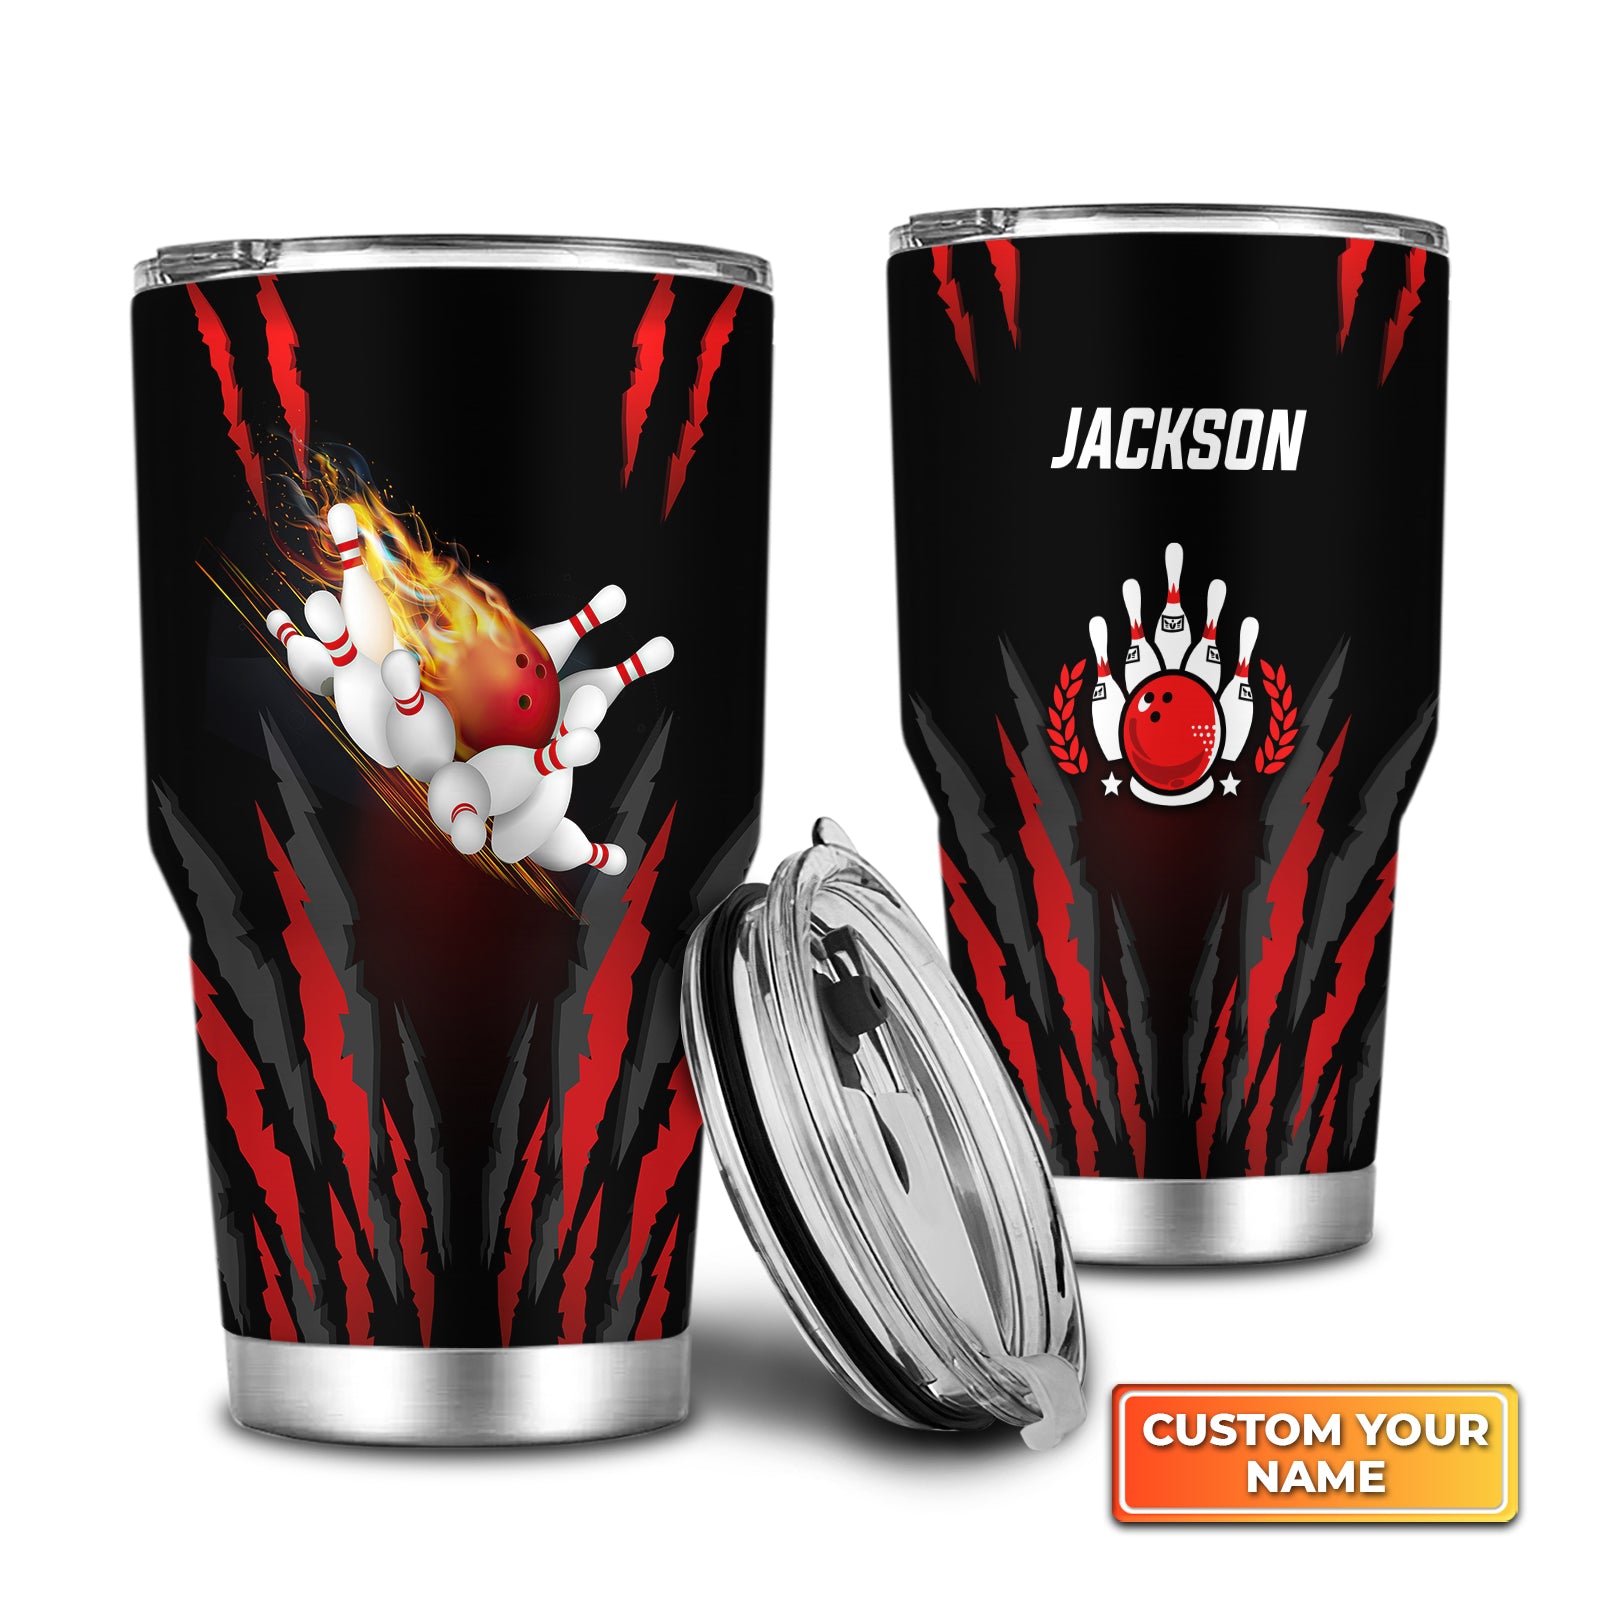 The Red Bowling Ball In Flames Breaks White Skittles Personalized Tumbler Best Gifts For Bowling Lovers - QB95